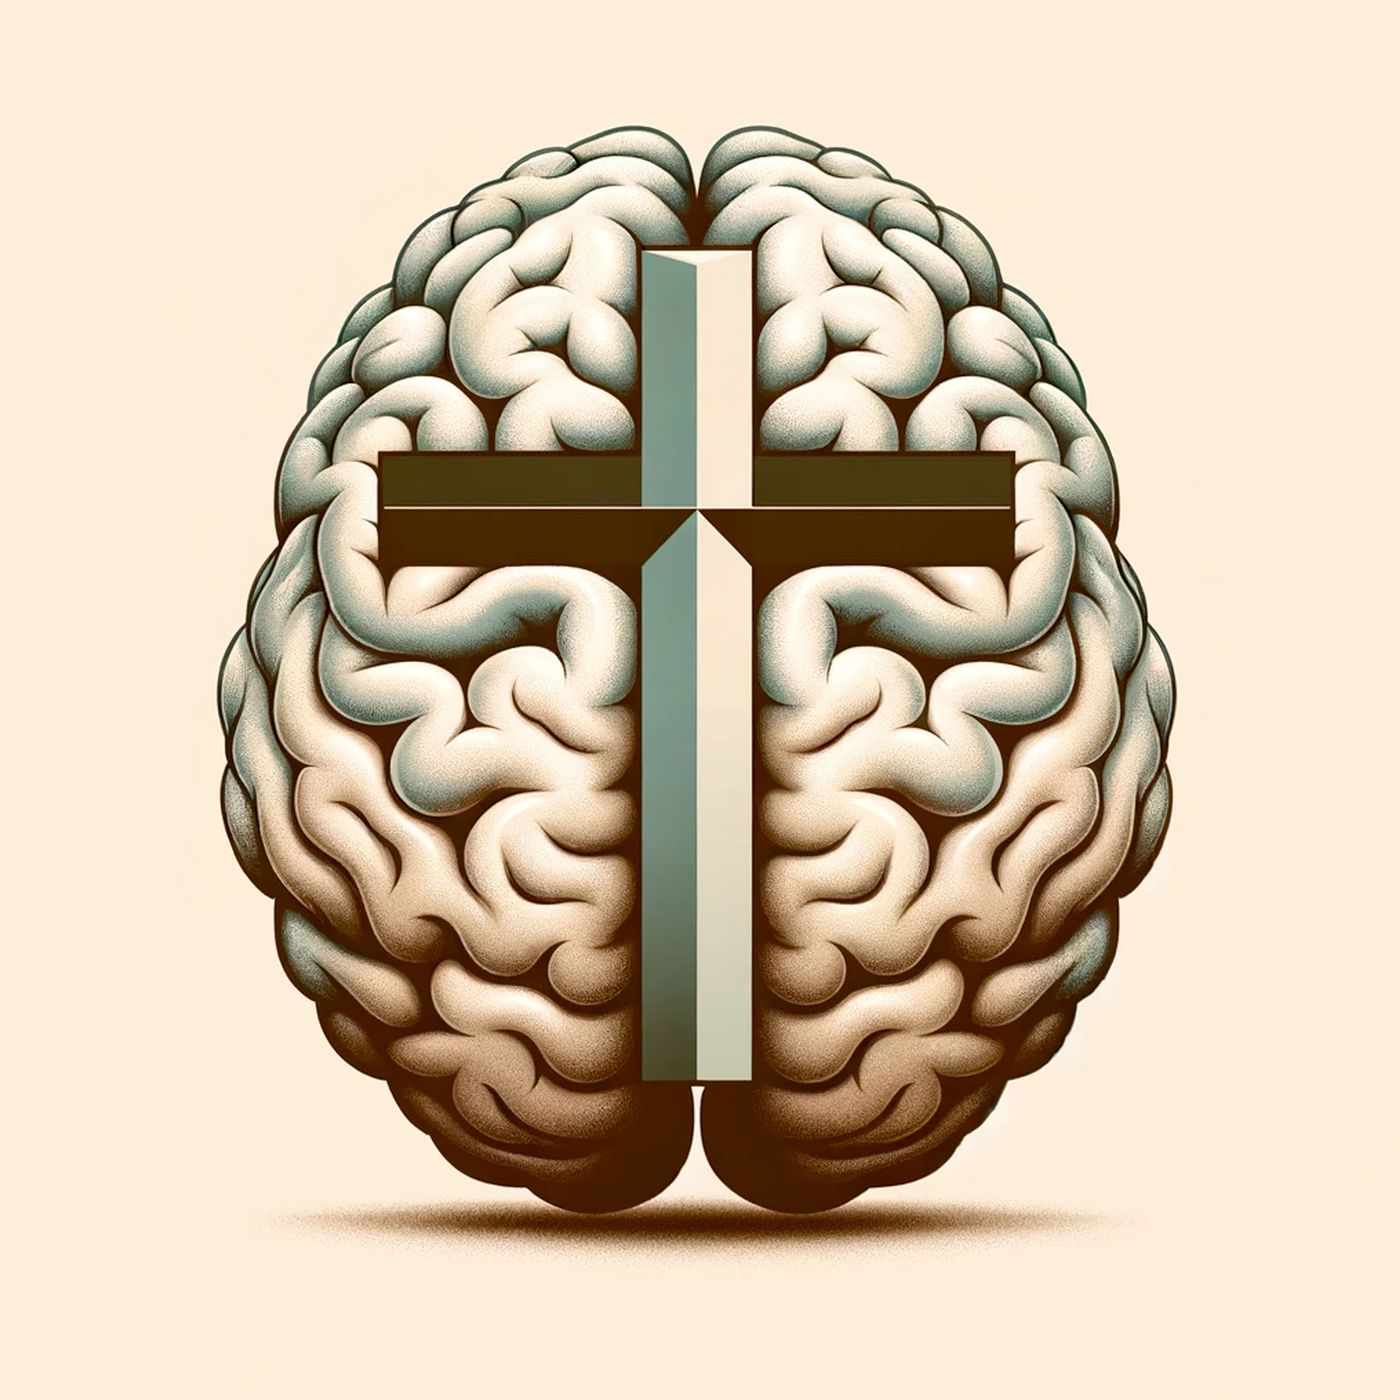 9 FUN Brain Exercises for Christians (to improve your memory!)